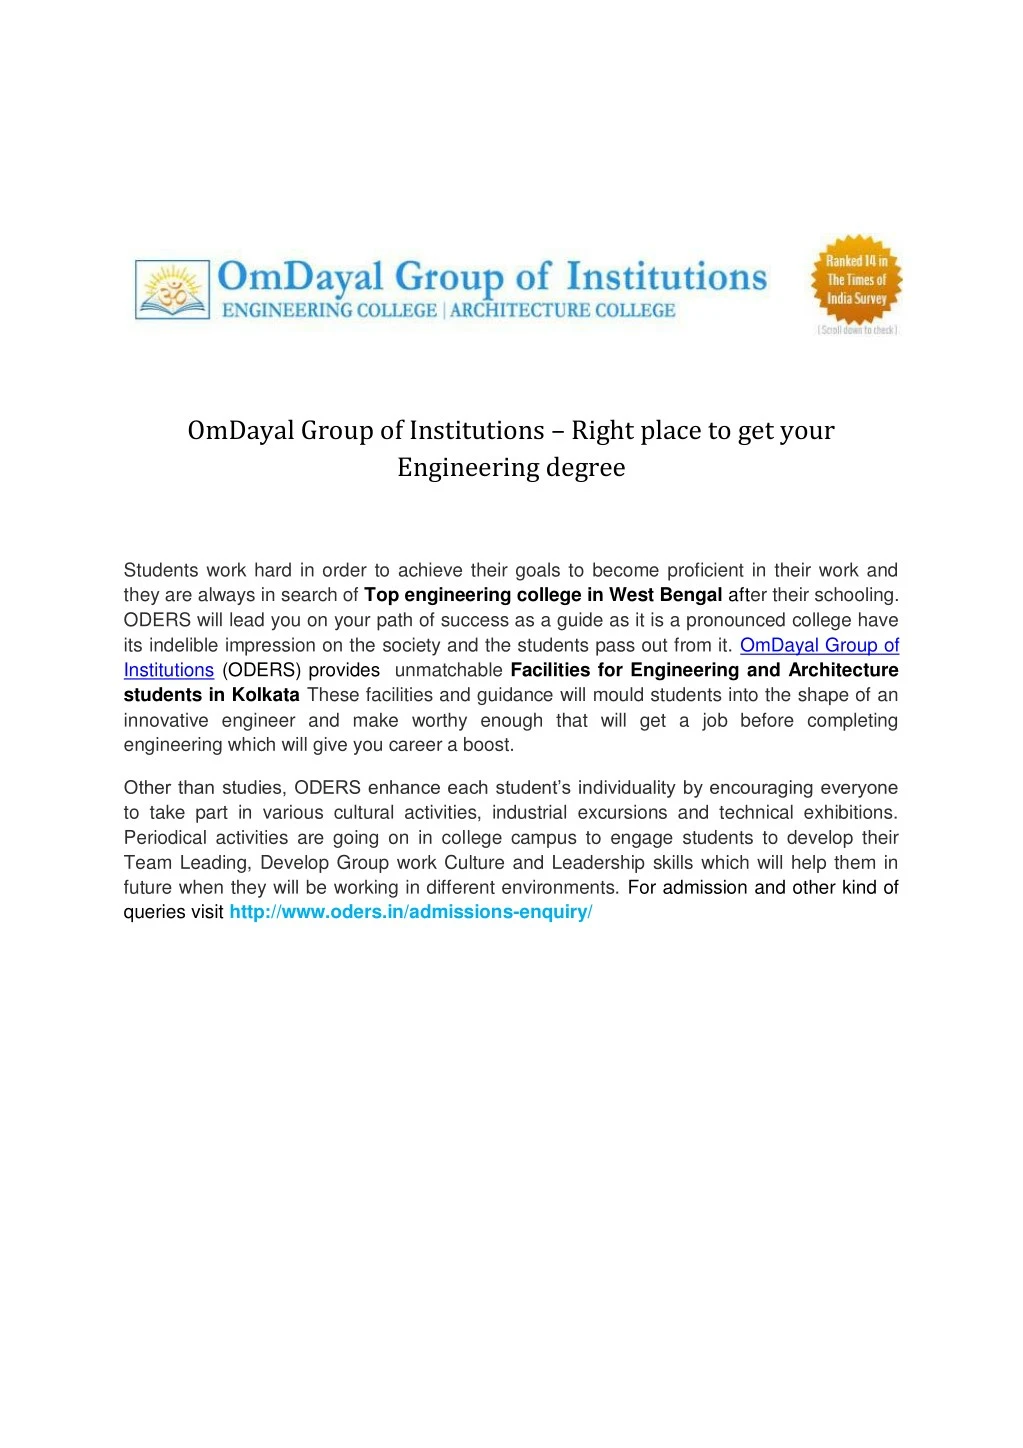 omdayal group of institutions right place